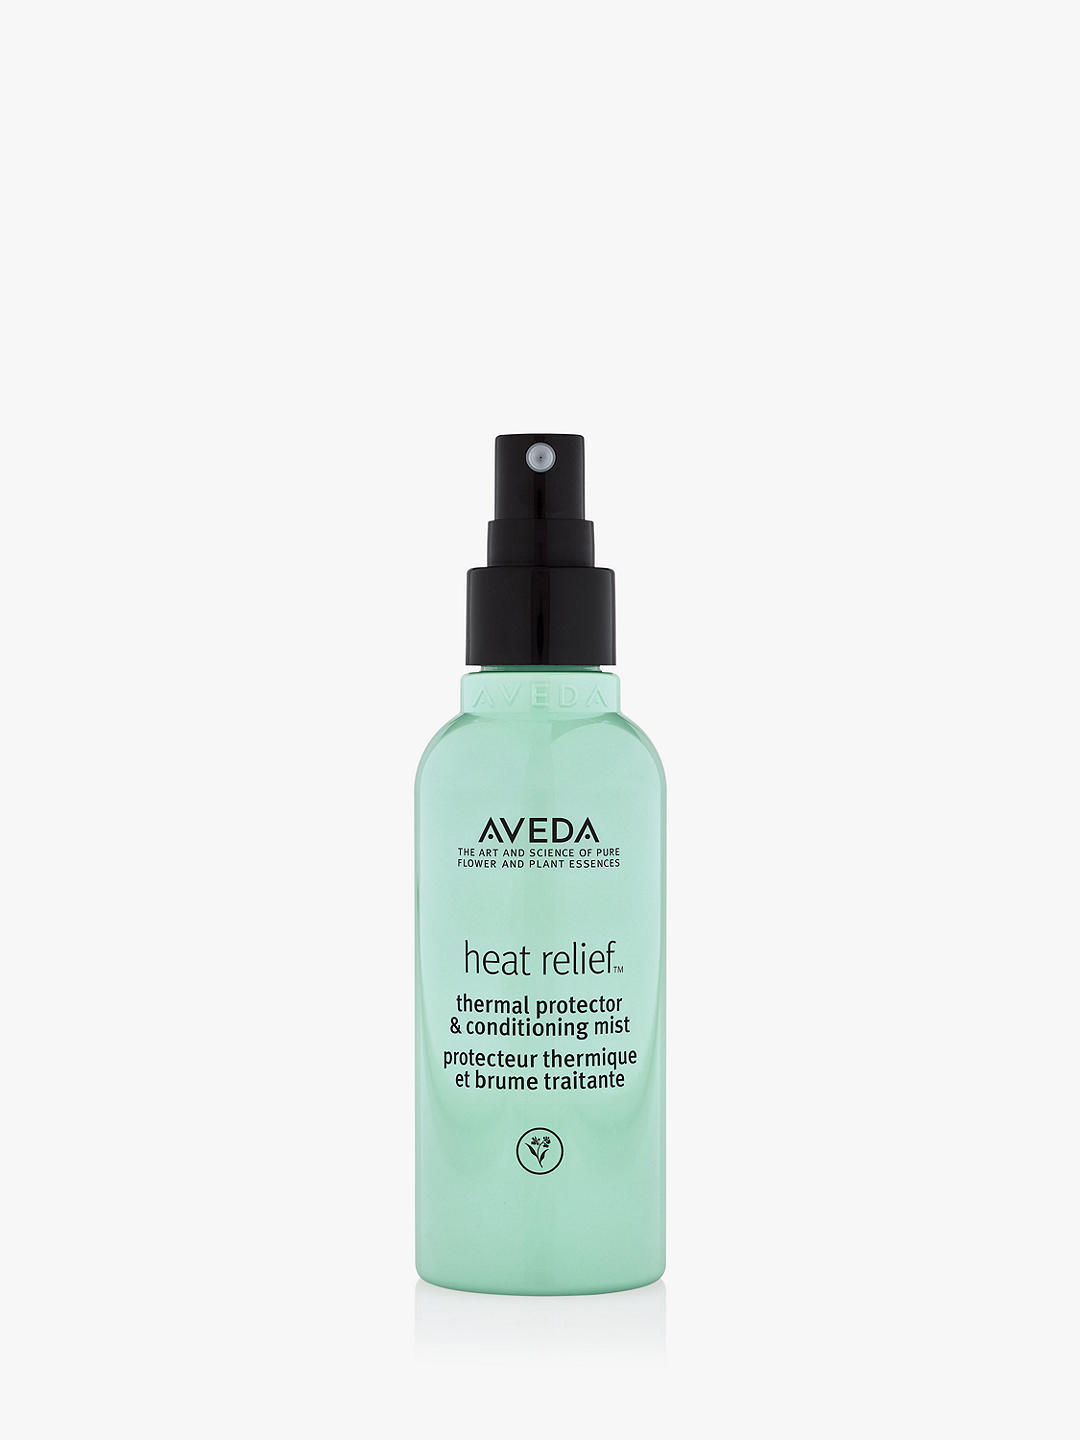 Aveda Heat Relief Thermal Protector & Conditioning Mist, 100ml 1